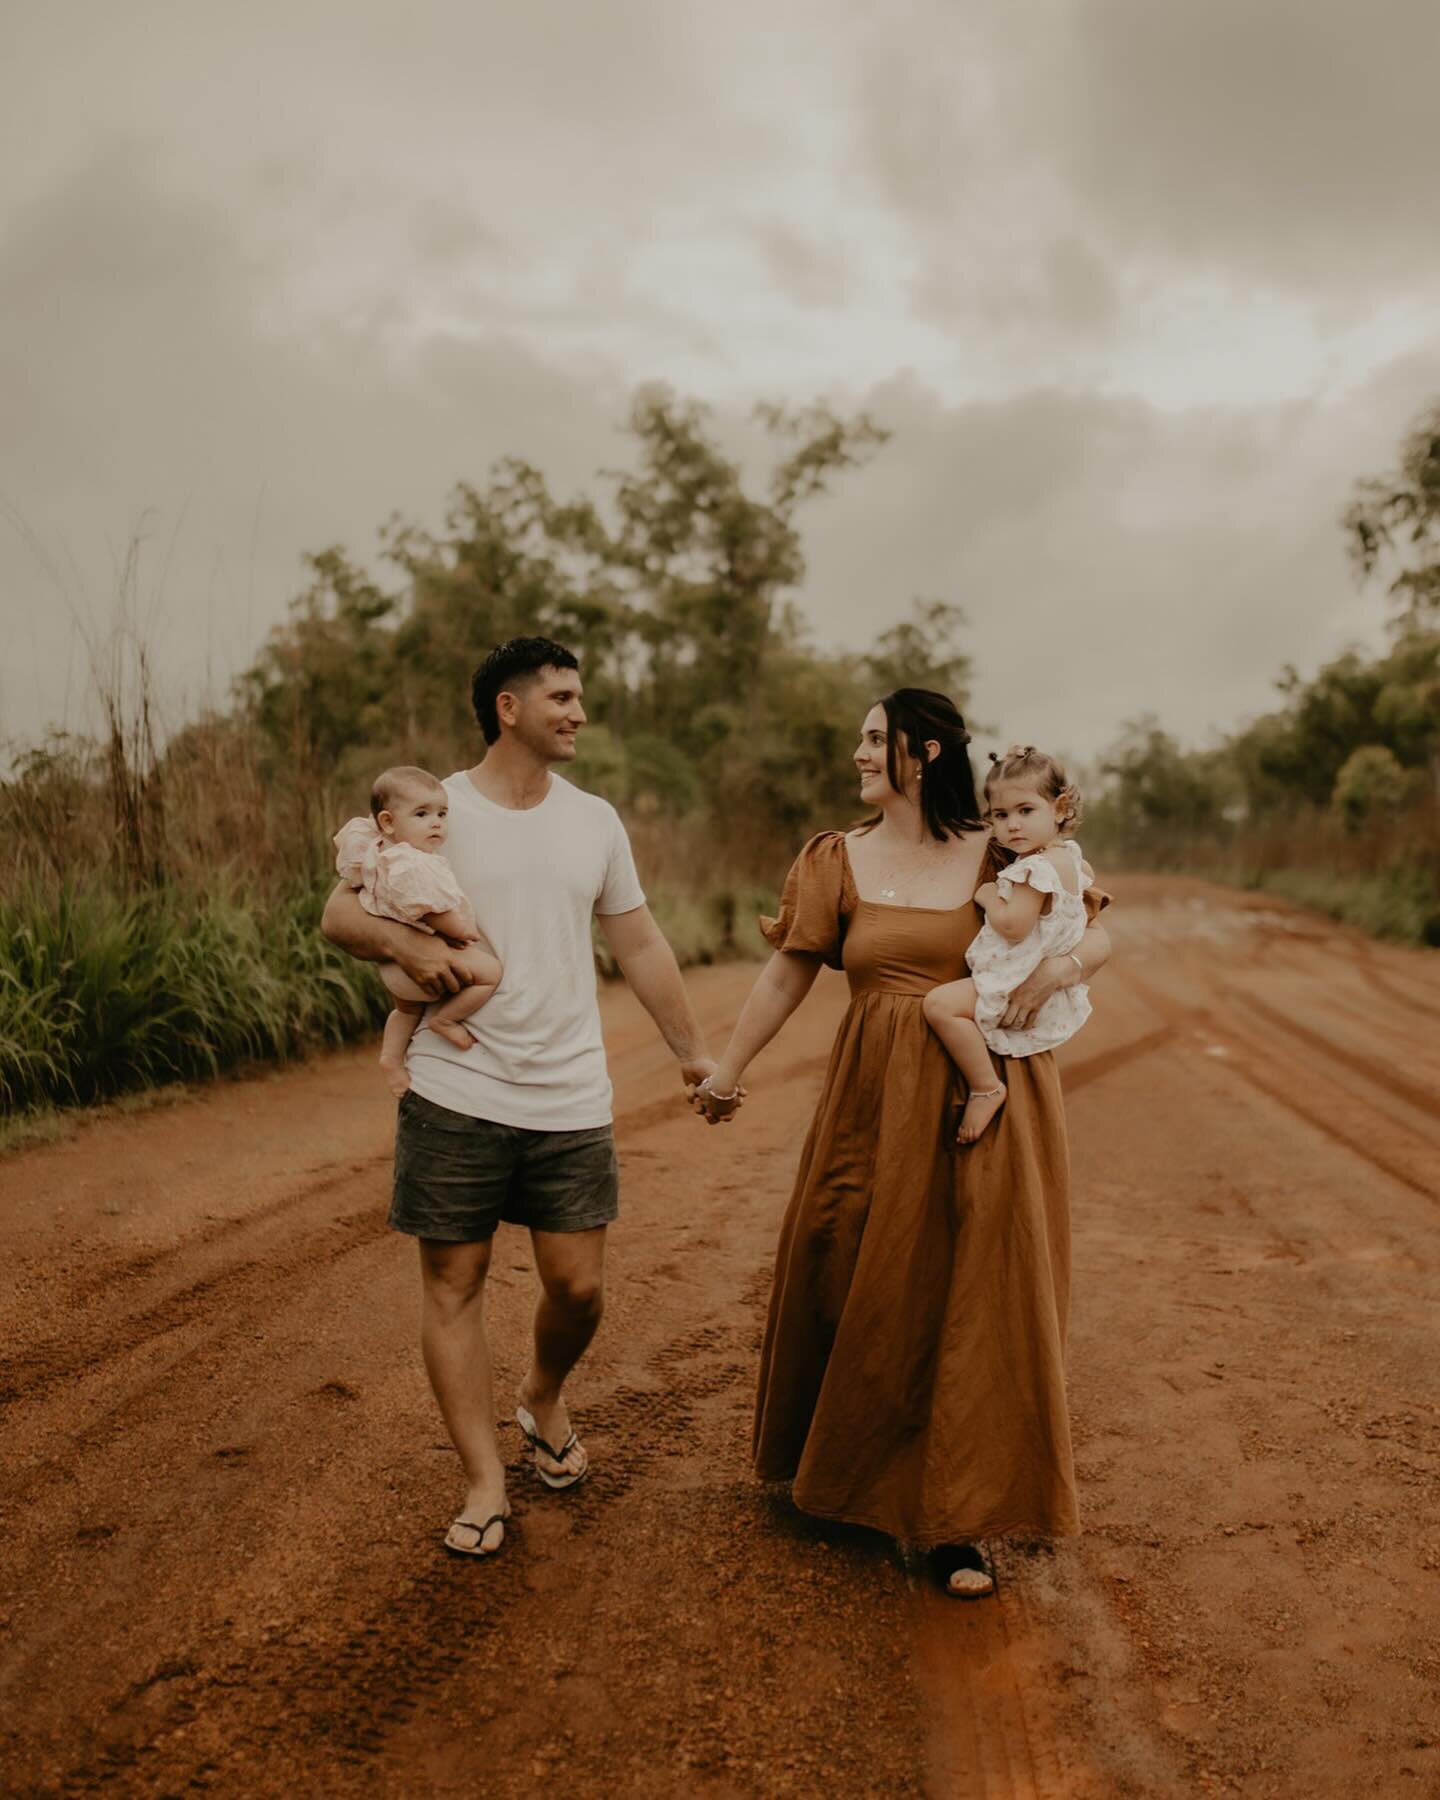 A moody sky seriously made this session! (And the family love of course) 💓🫶🏻 

Grateful to be invited back into these guys life to capture such special memories 💫

#photography #photographerlife #darwinphotographer #motherhoodunplugged #thestoryt